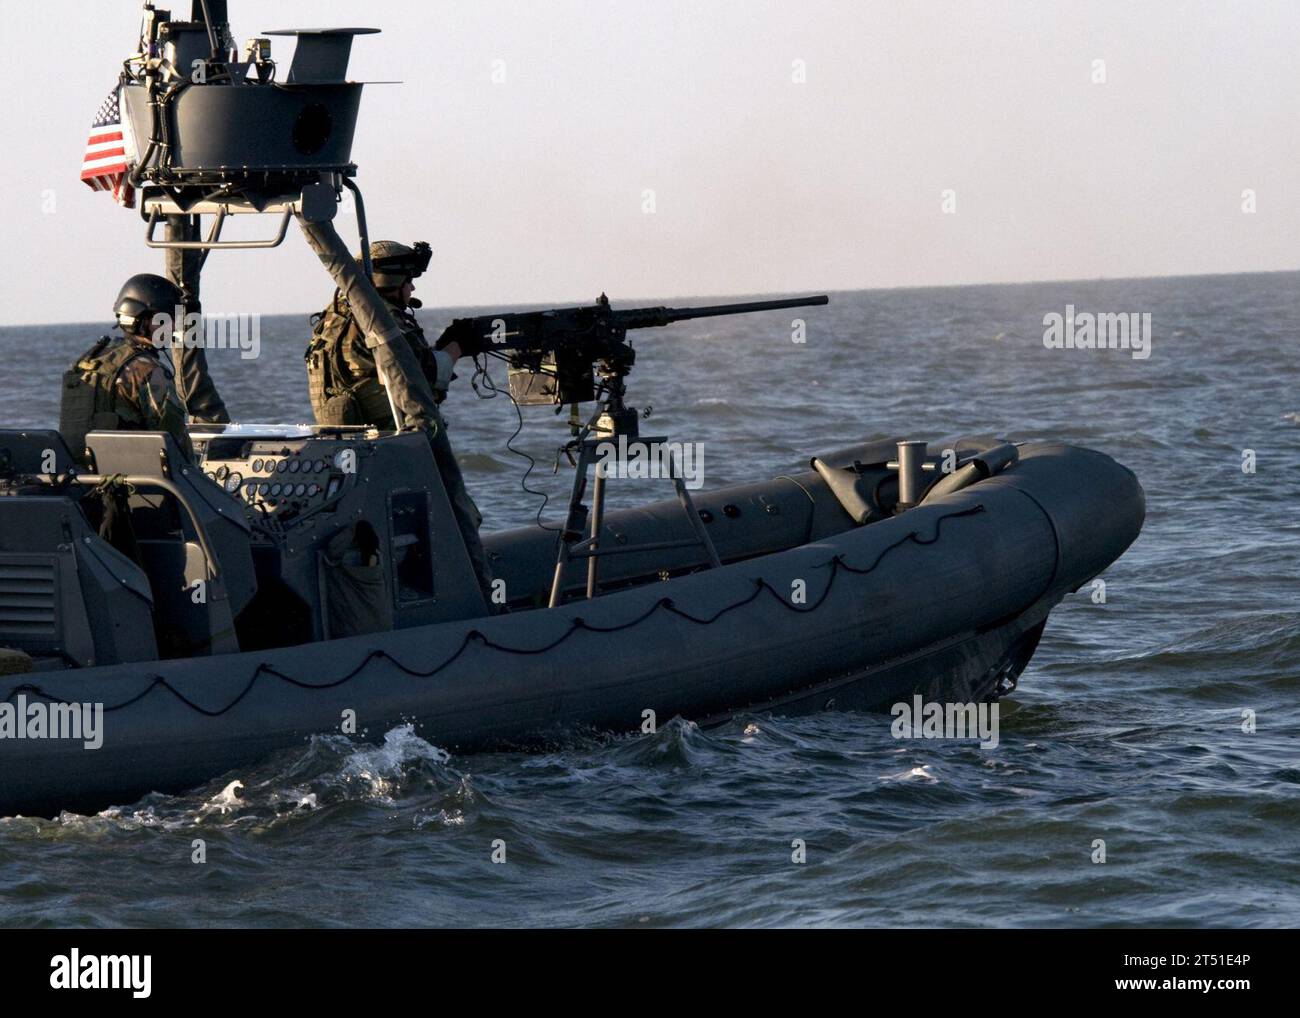 0809034500G-371 PINEY ISLAND, N.C. (Sept. 3, 2008) A Special Warfare Combatant-craft Crewman (SWCC) fires a .50-caliber machine gun from a Naval Special Warfare 11-meter rigid-hull inflatable boat during a live-fire training exercise in the Pamlico Sound. SWCC from Special Boat Team 20 spent the day conducting drills while firing .50-caliber machine guns and MK-19 grenade launchers preparing for an upcoming deployment supporting the Global War on Terrorism. Navy Stock Photo